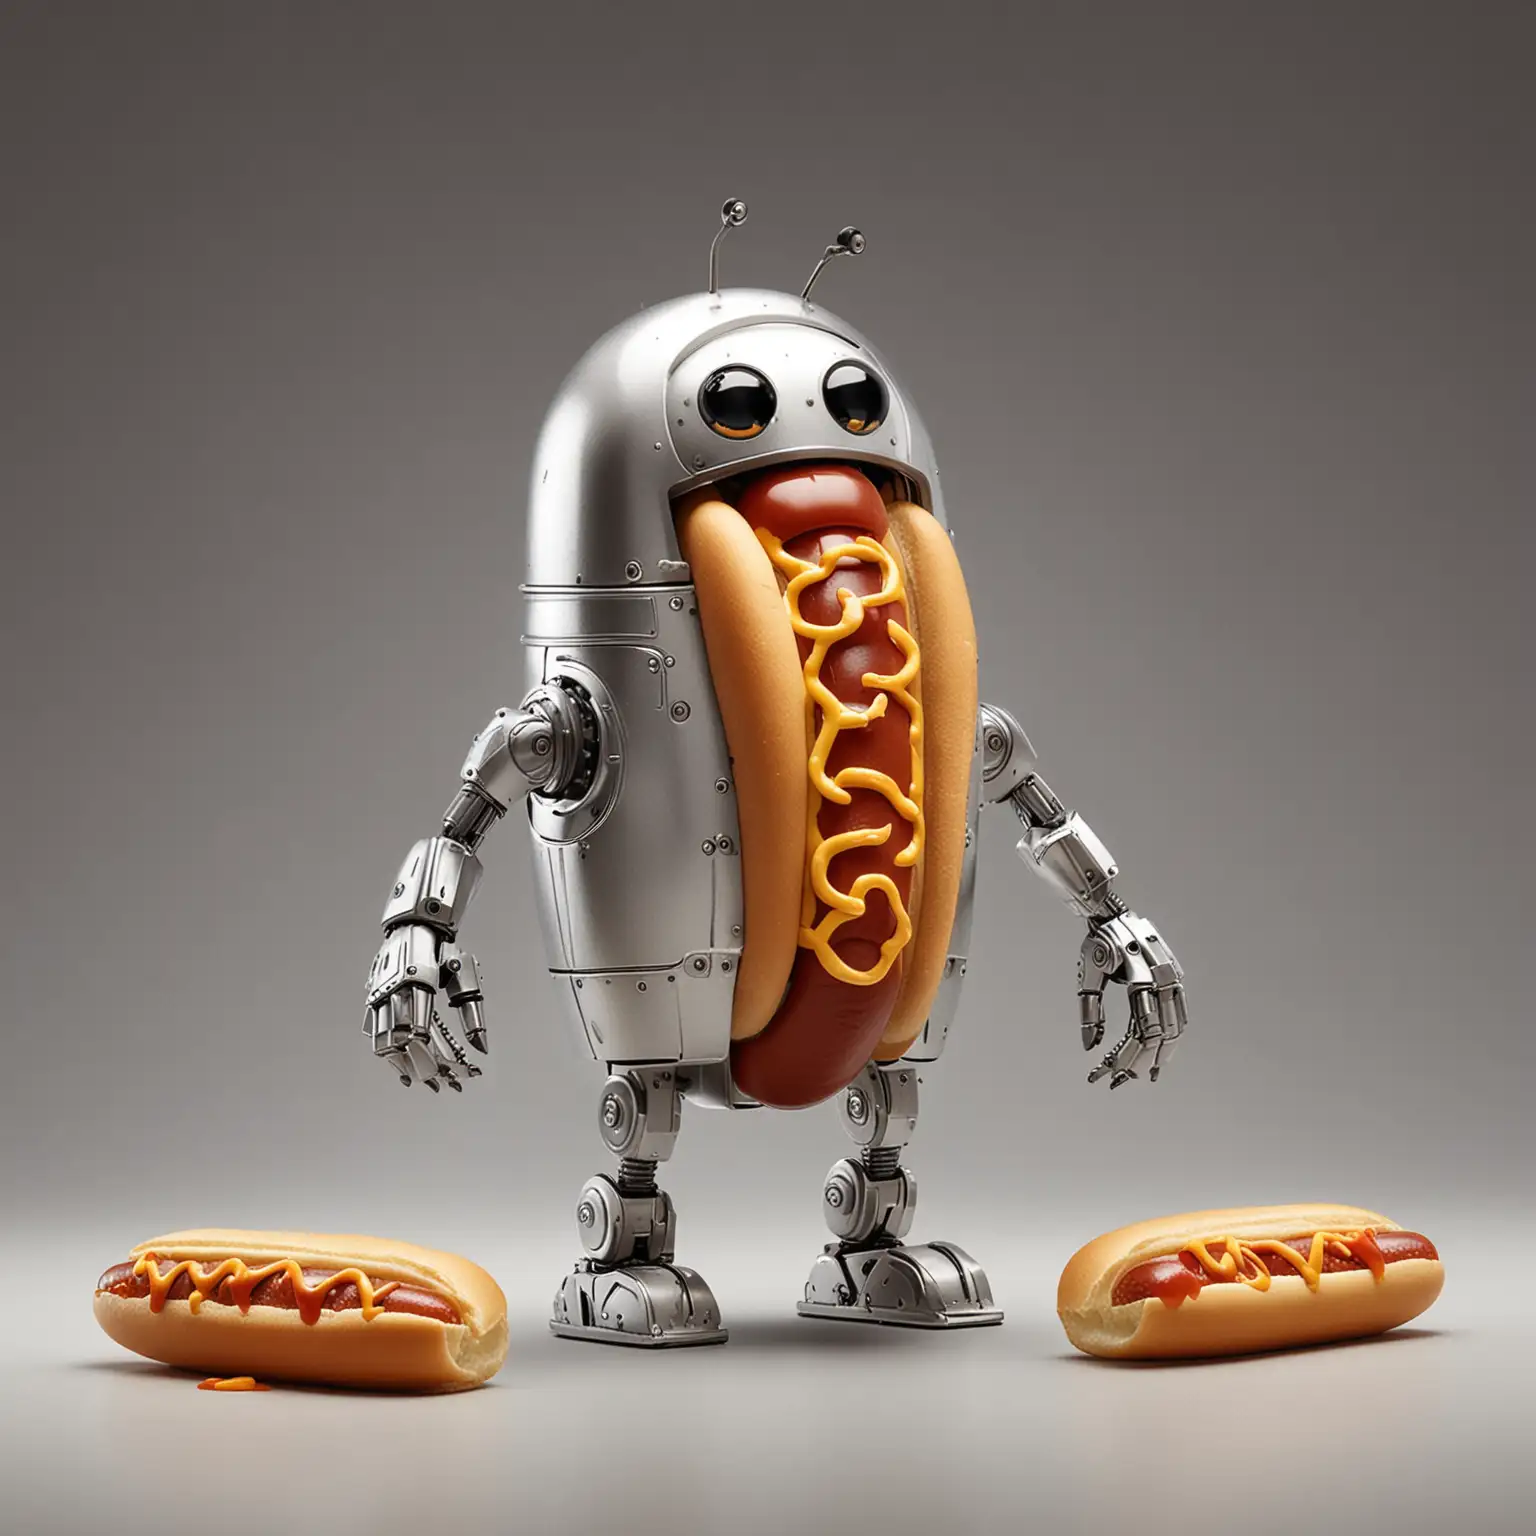 A metallic robot in the shape of a steamed hot dog in a bun